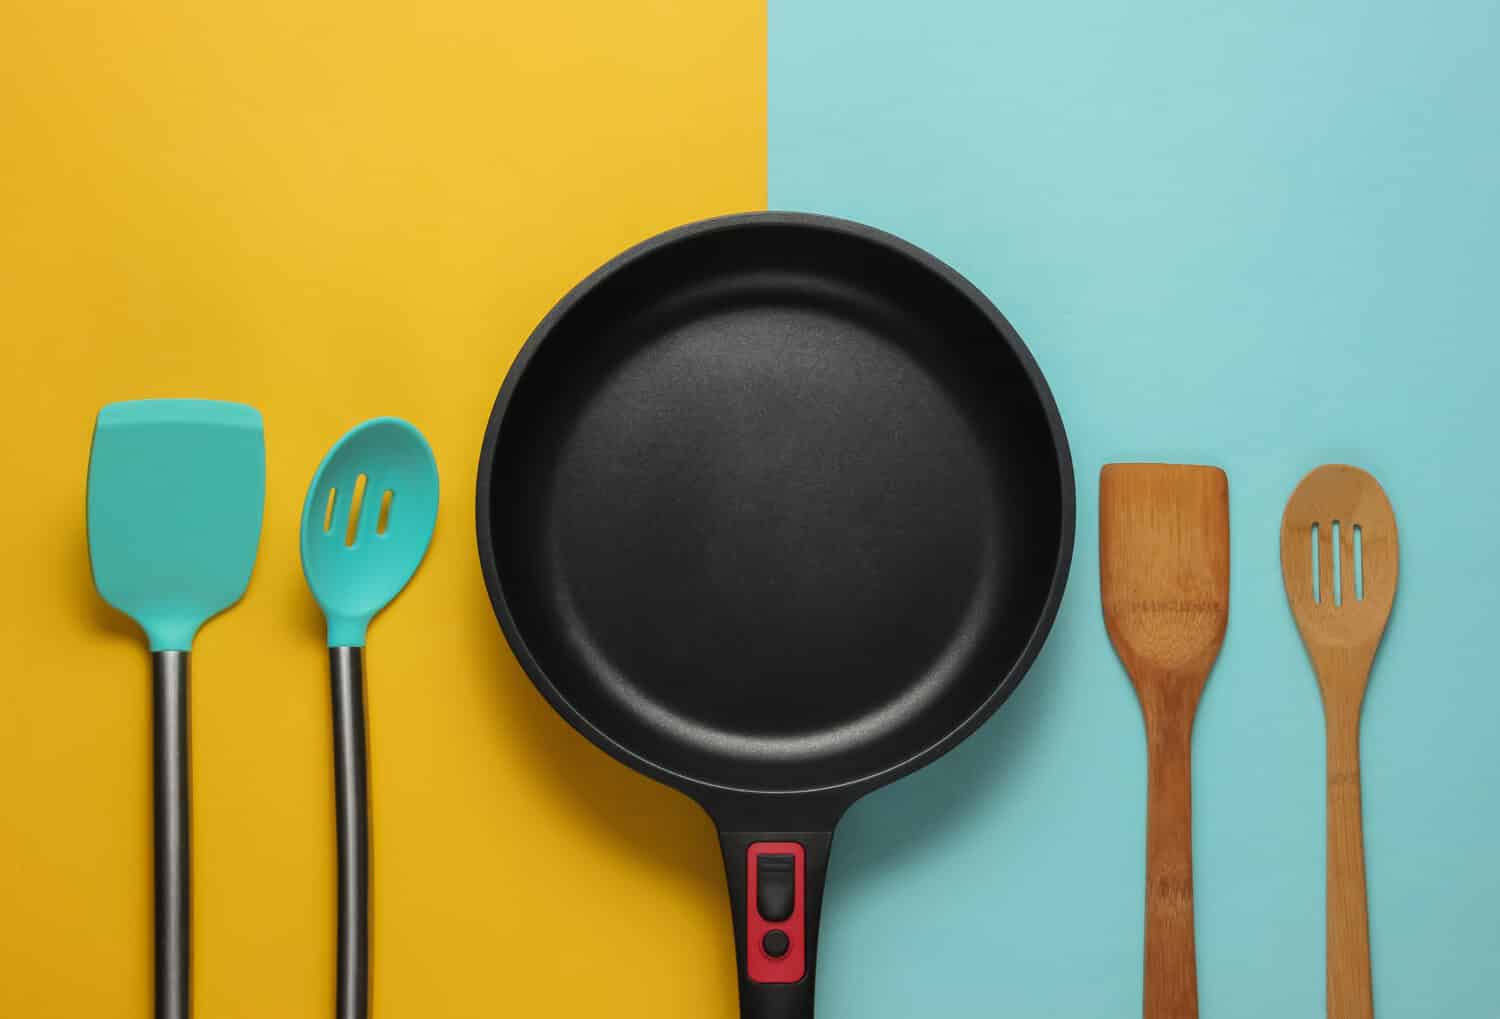 Black Teflon Skillet With Nonstick Coated Surface Isolated Stock